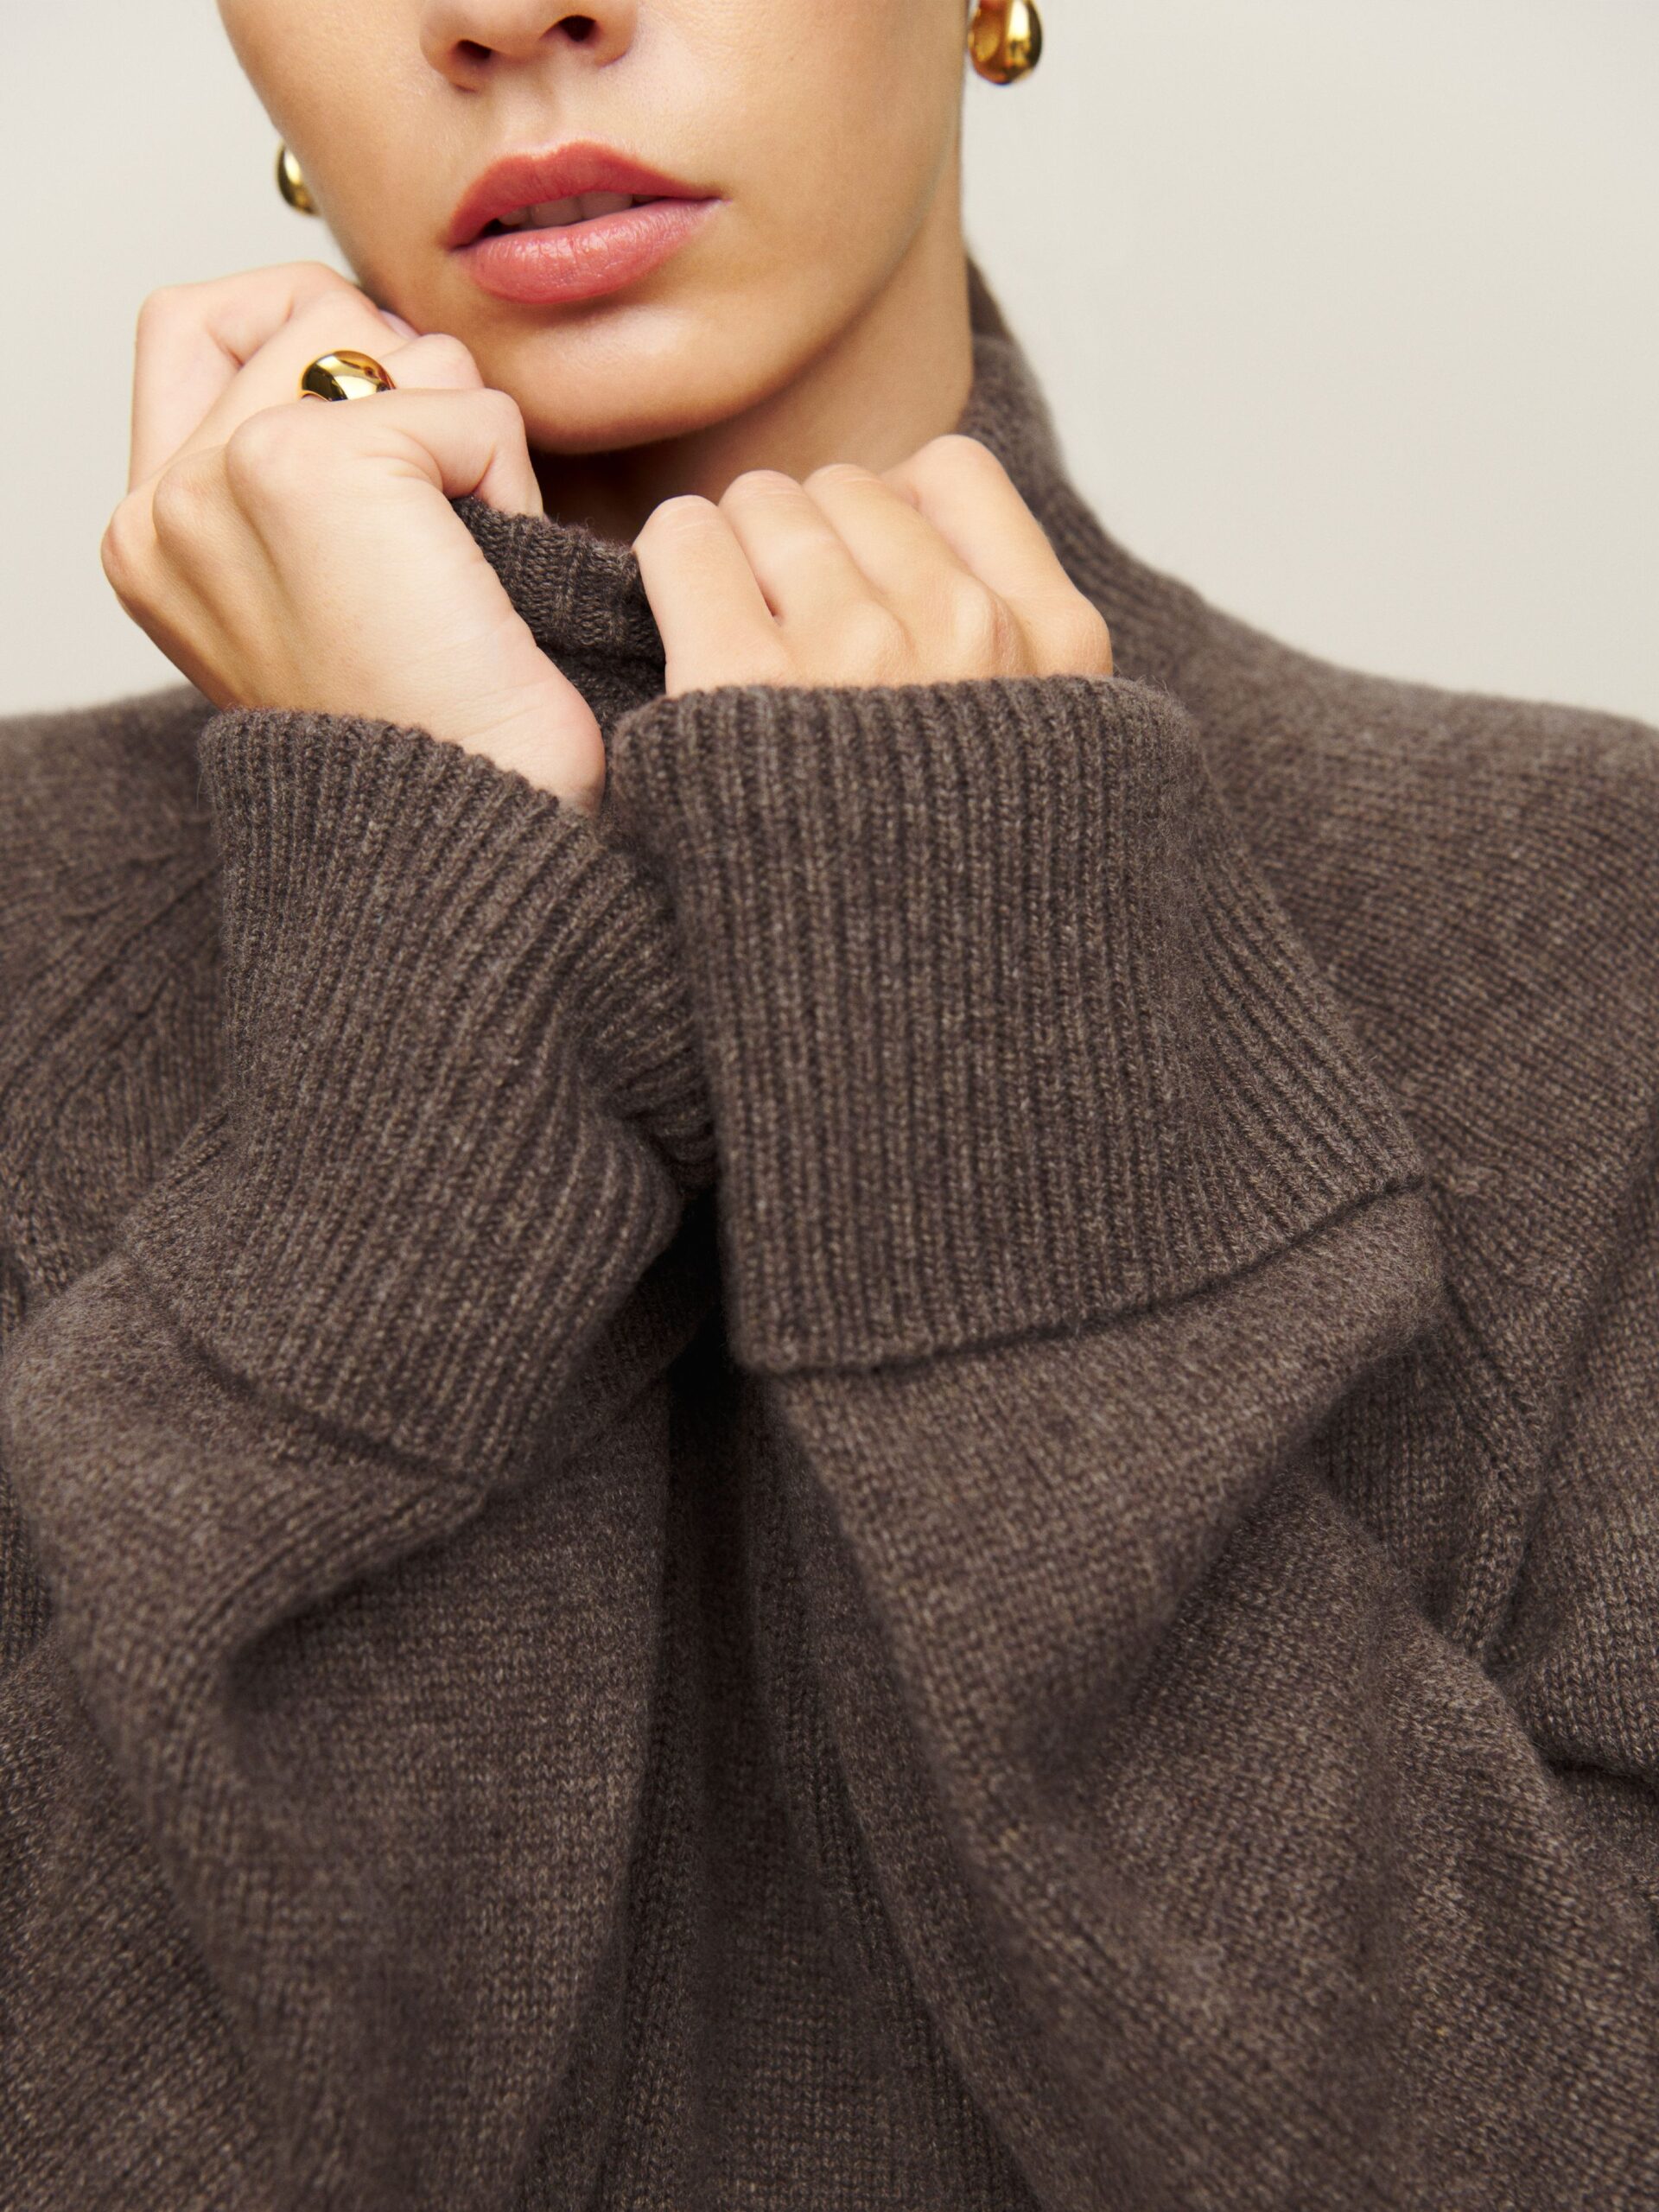 How to Wear Cashmere Sweater: Top 13 Attractive Outfit Ideas for Ladies